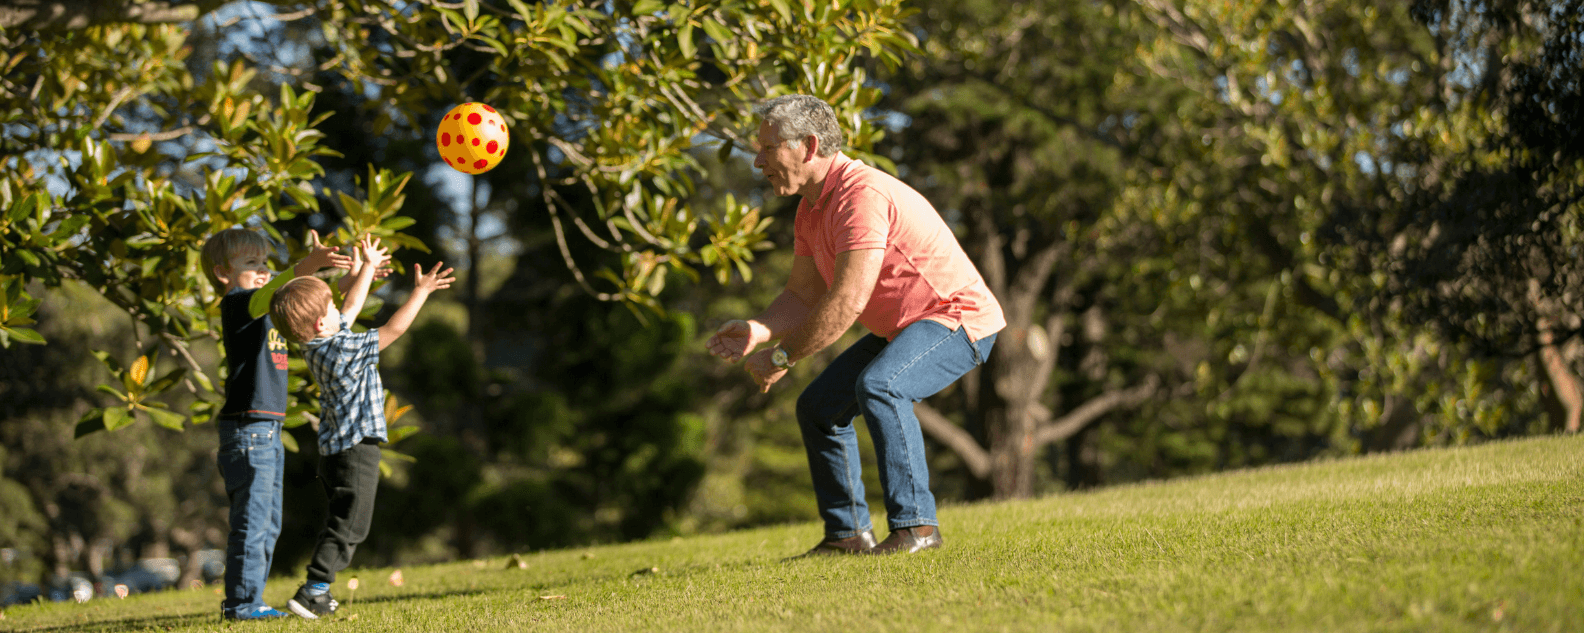 Two young children and an older male carer throw an orange ball under a fig tree.